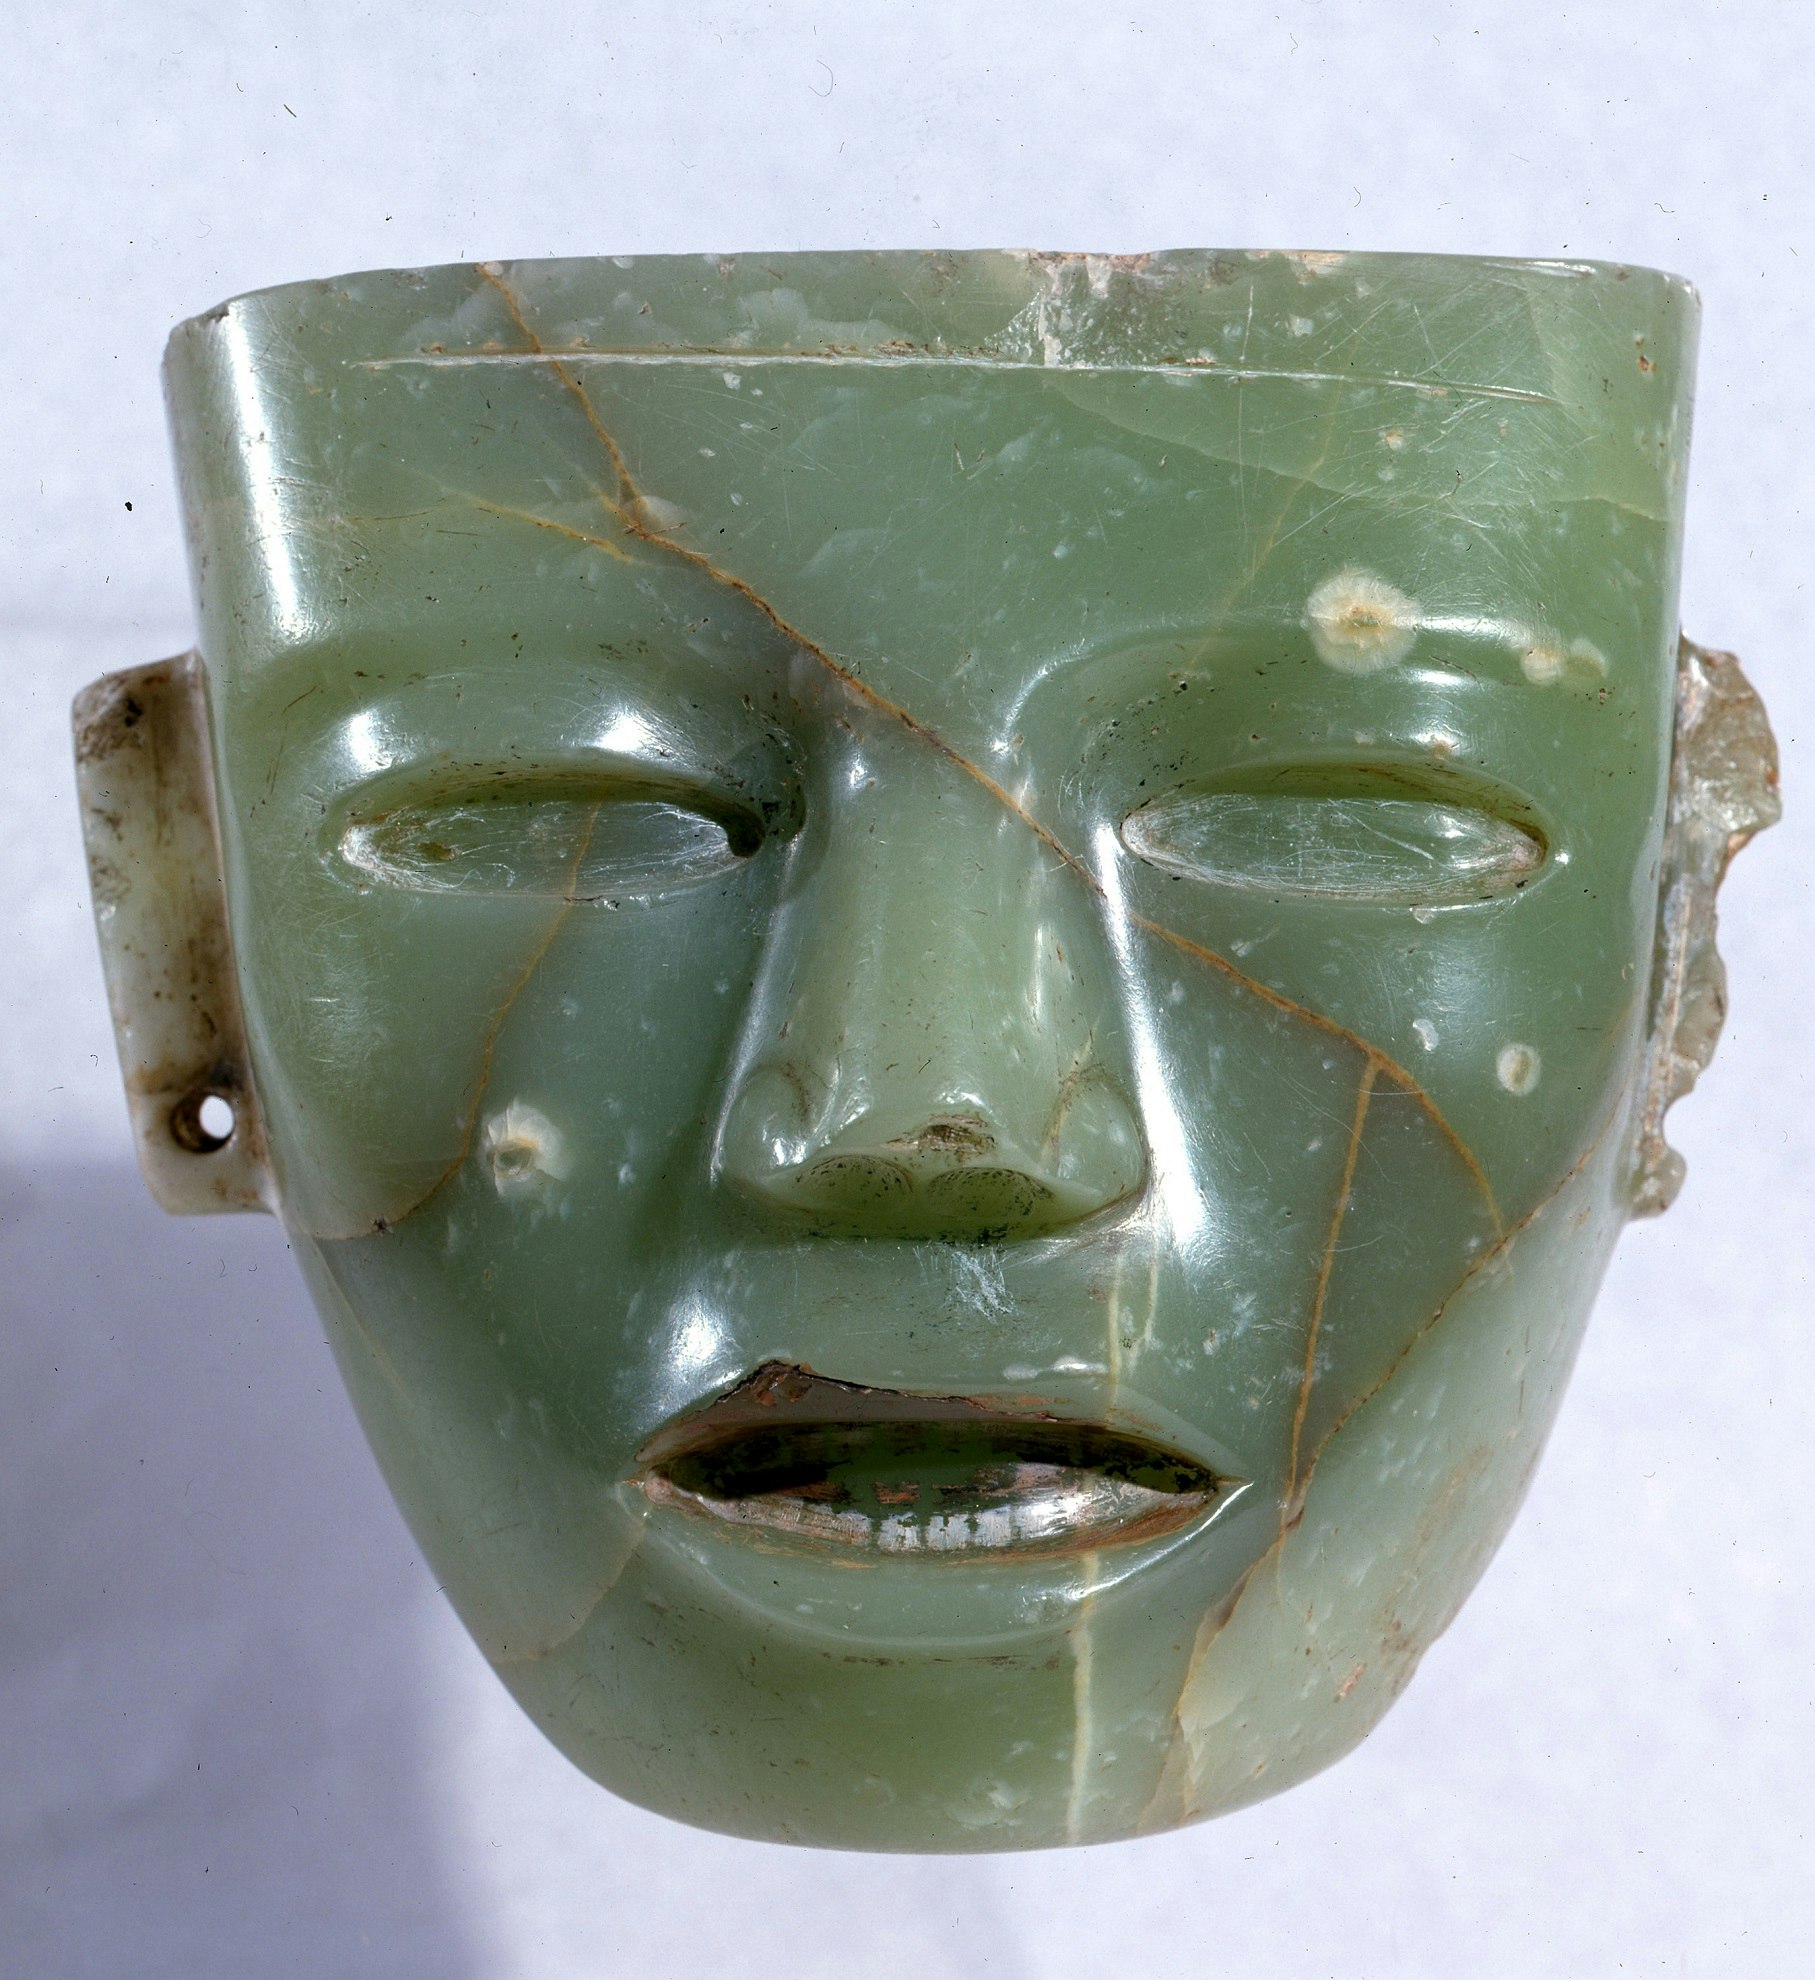 Stone mask from Teotihuacan in Mexico